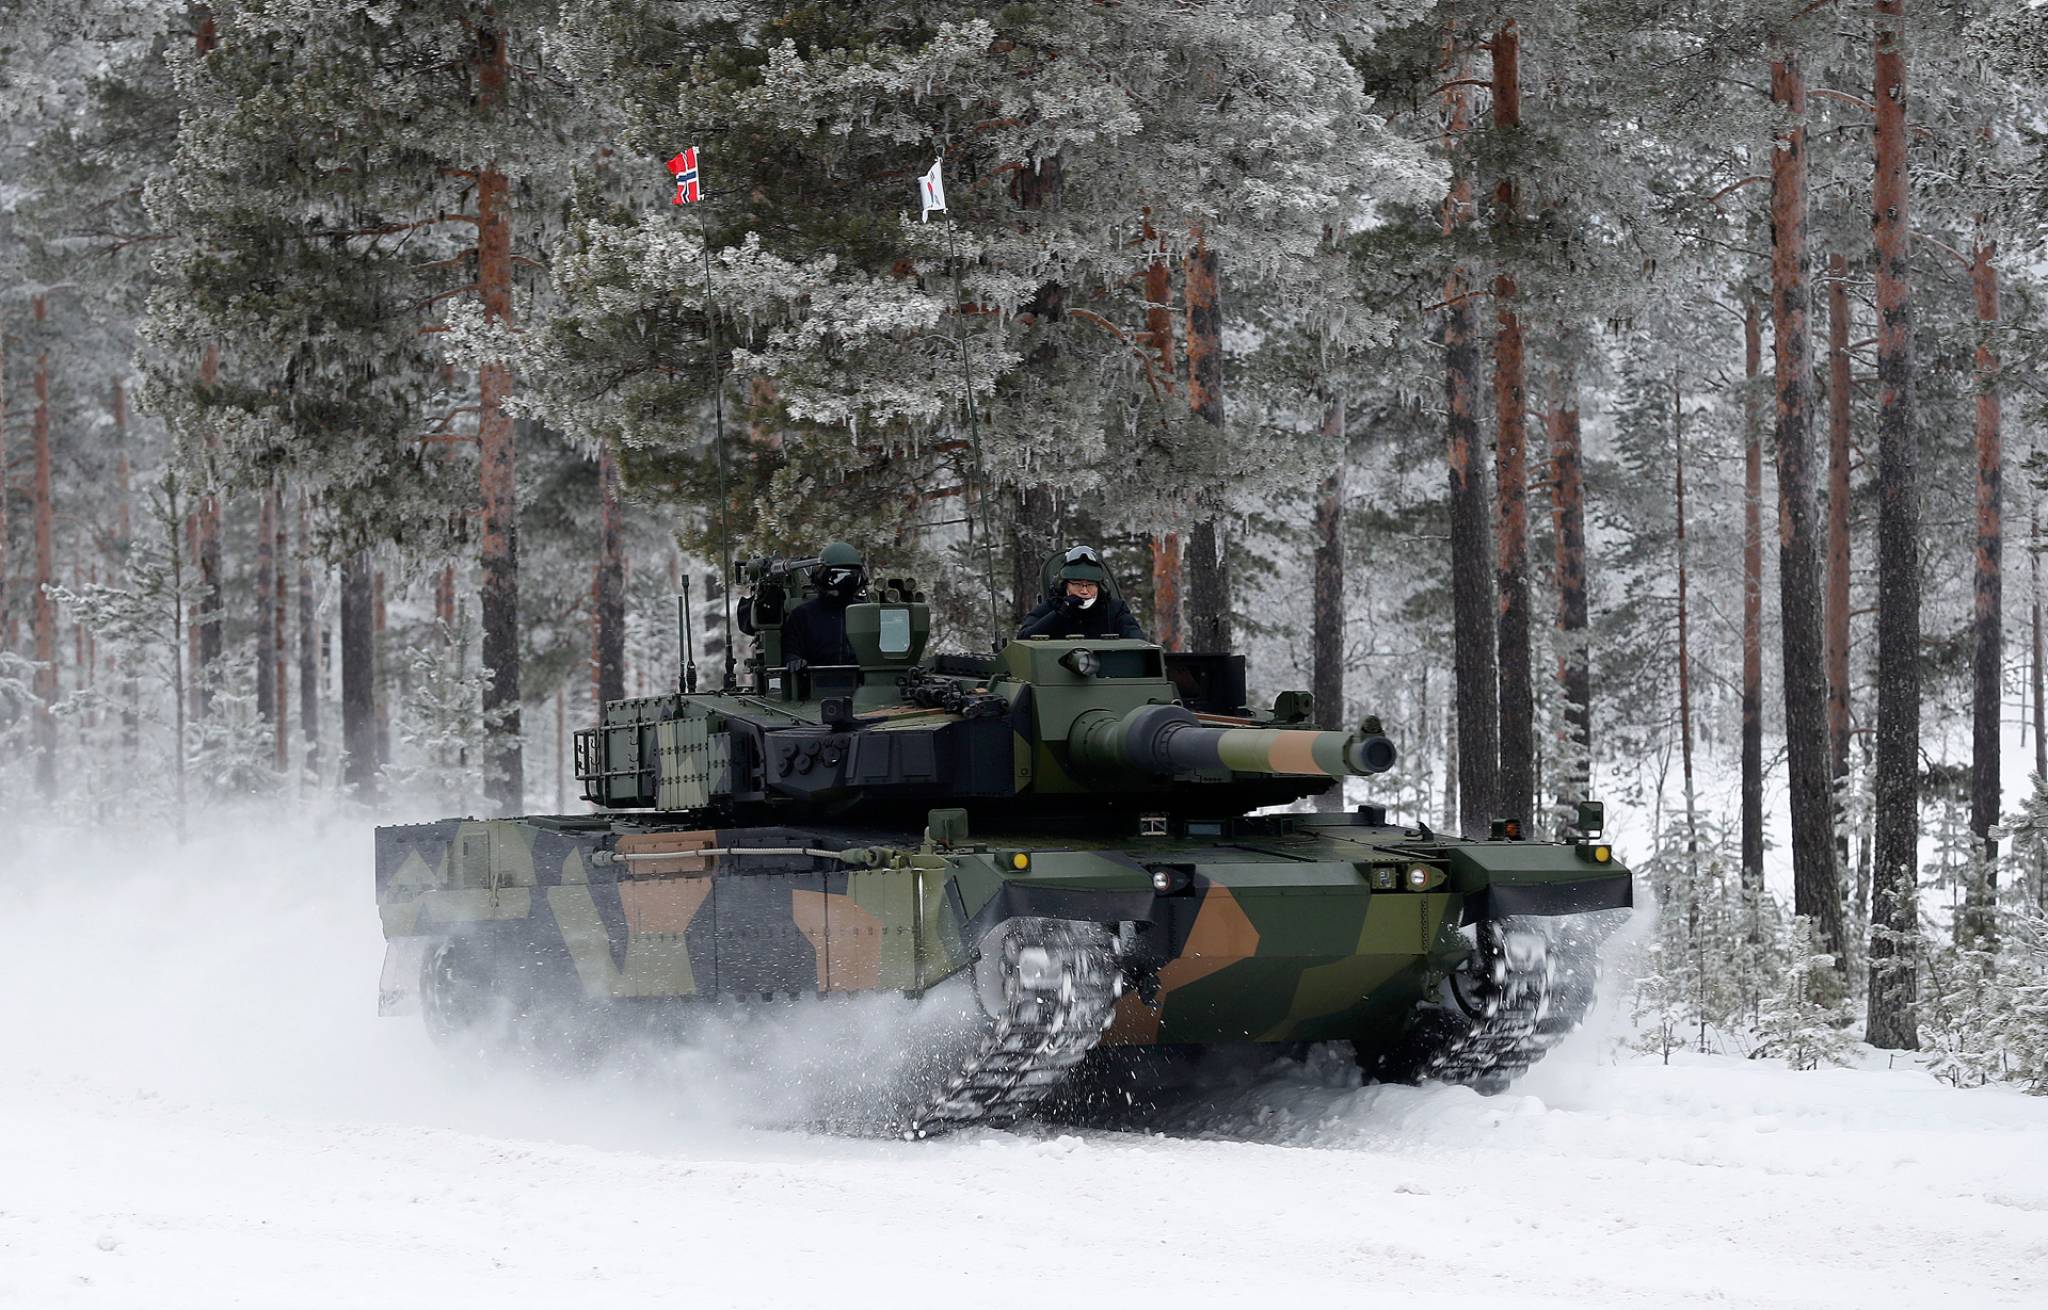 Leopard, Panther Undergo Winter Trial for Norway Battle Tank